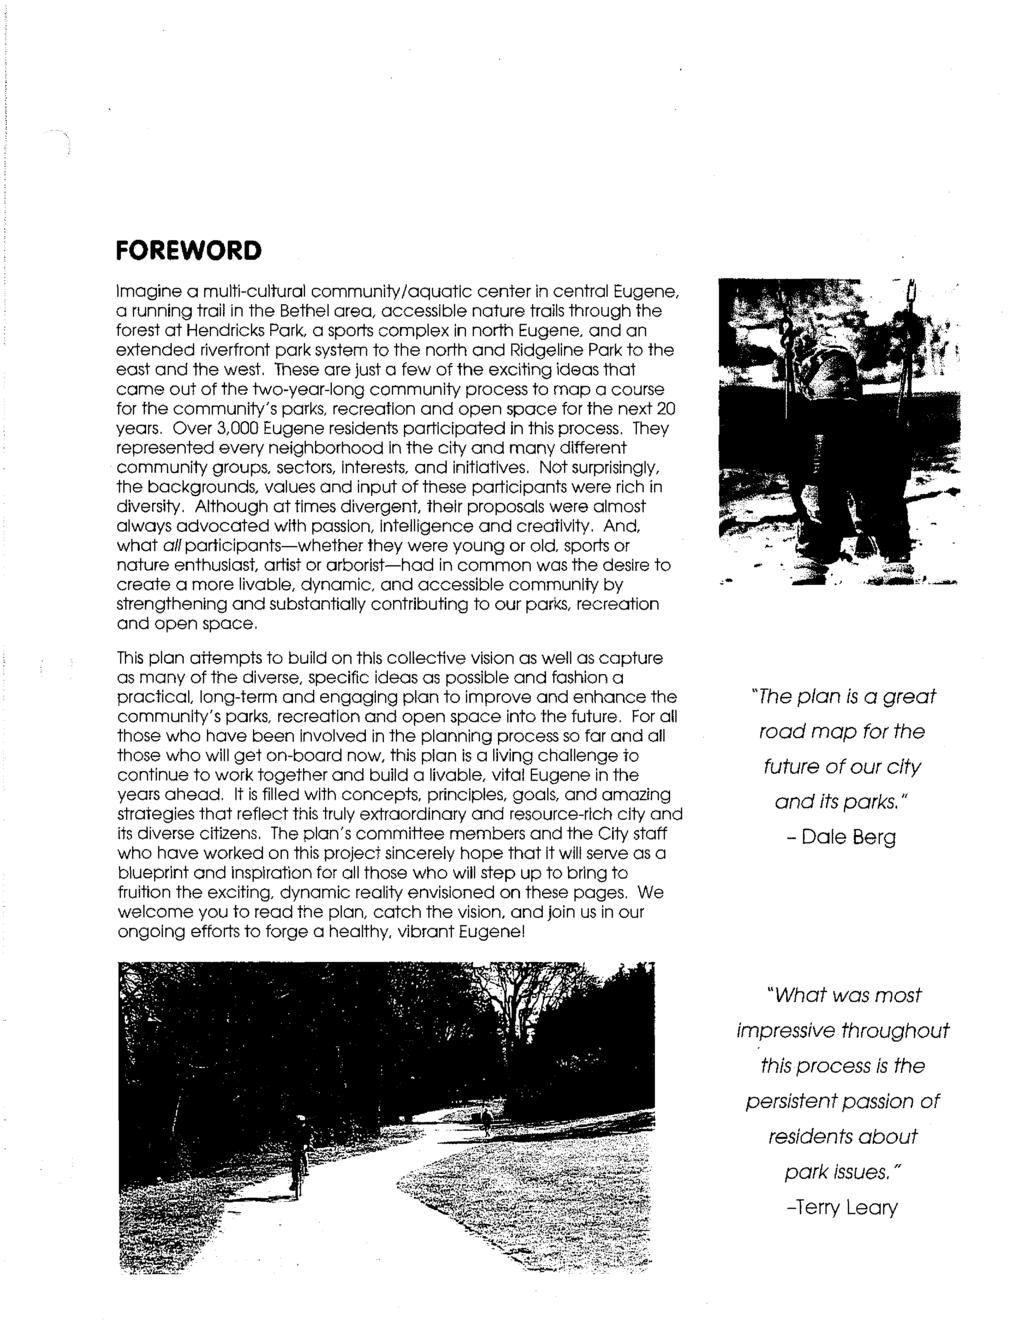 FOREWORD Imagine a multi-cultural community/aquatic center in central Eugene, a running trail in the Bethel area accessible nature trails through the forest at Hendricks Park, a sports complex in